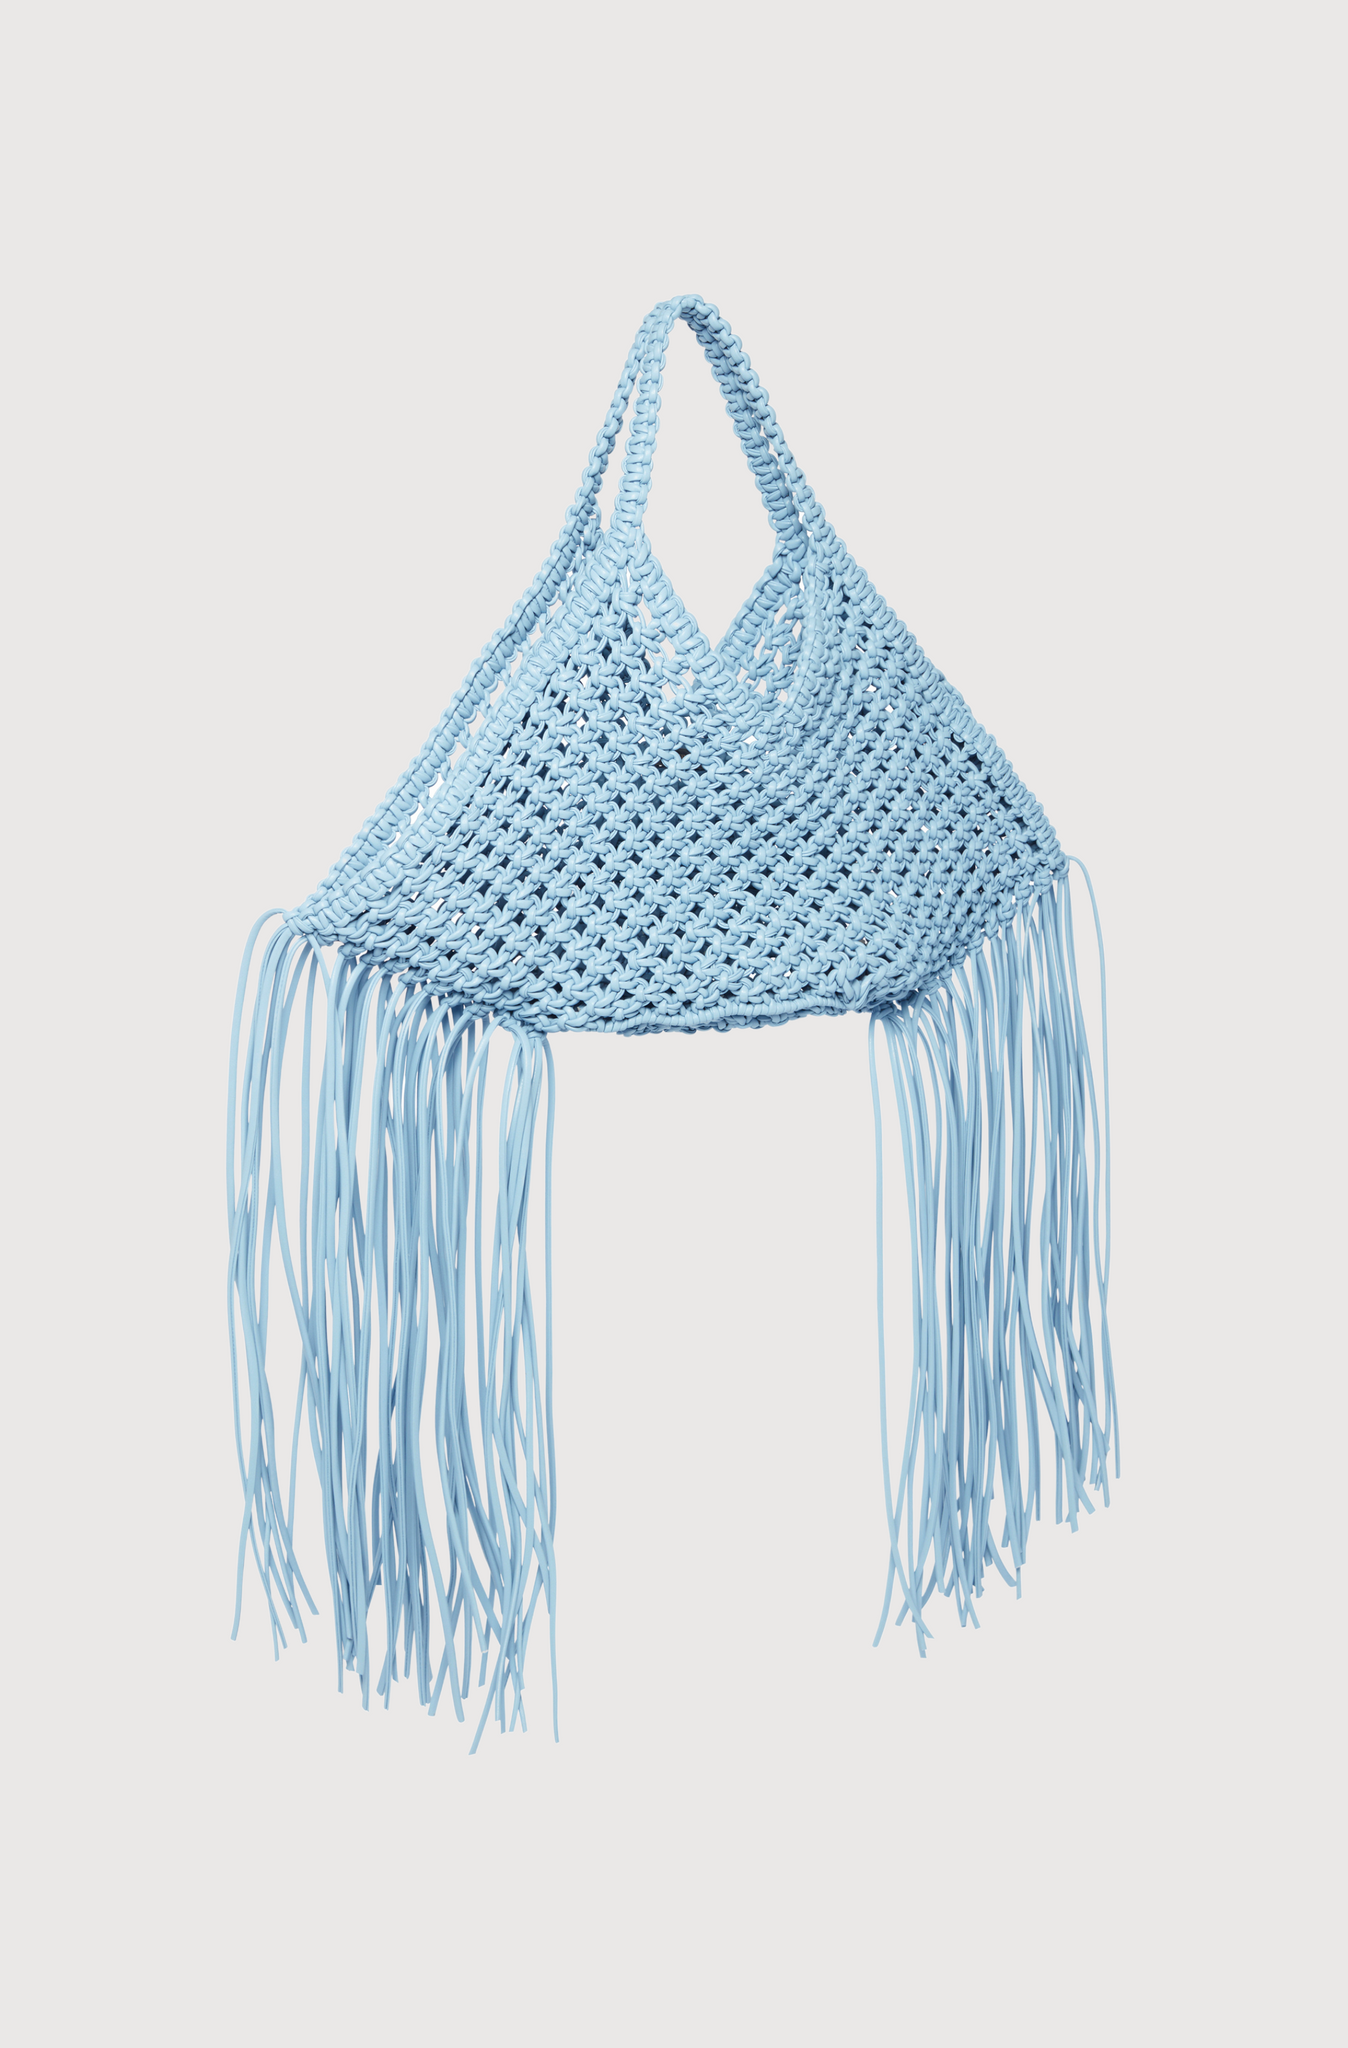 WOVEN BASKET - BABY BLUE